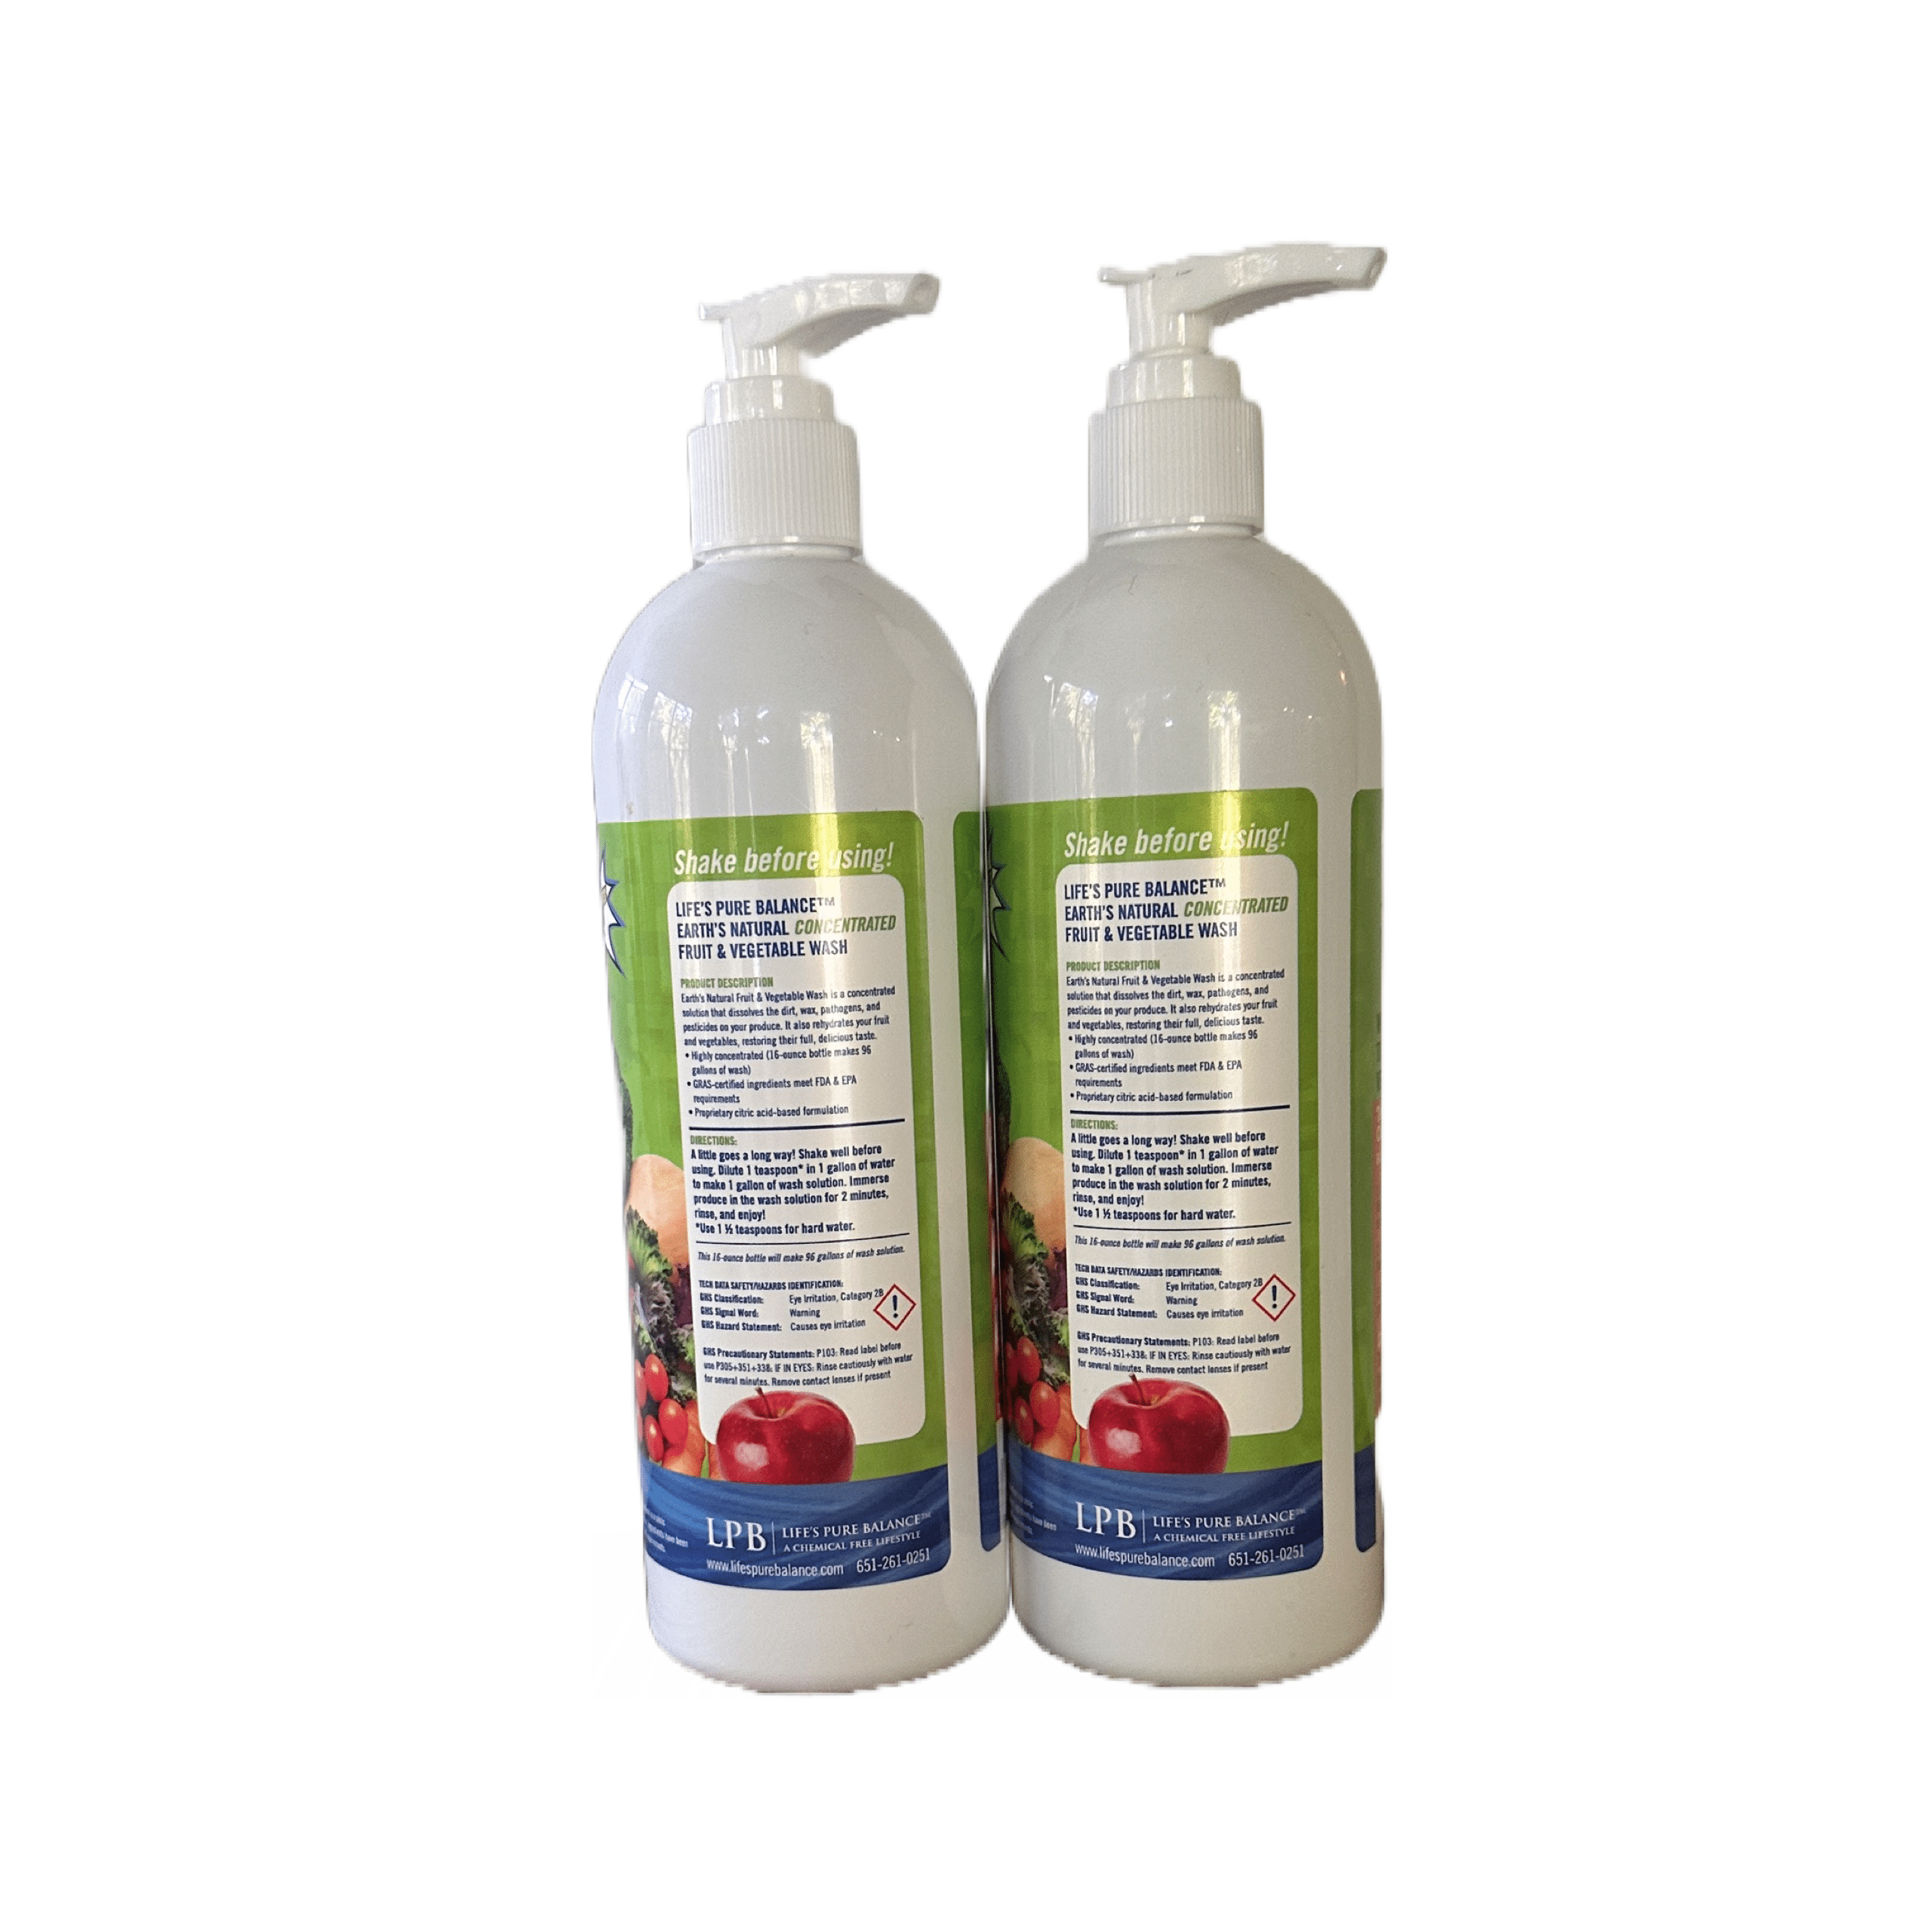 State® Fruit & Veggie Wash - Fragrance Free - Case of 4 gallons - State  Industrial Products